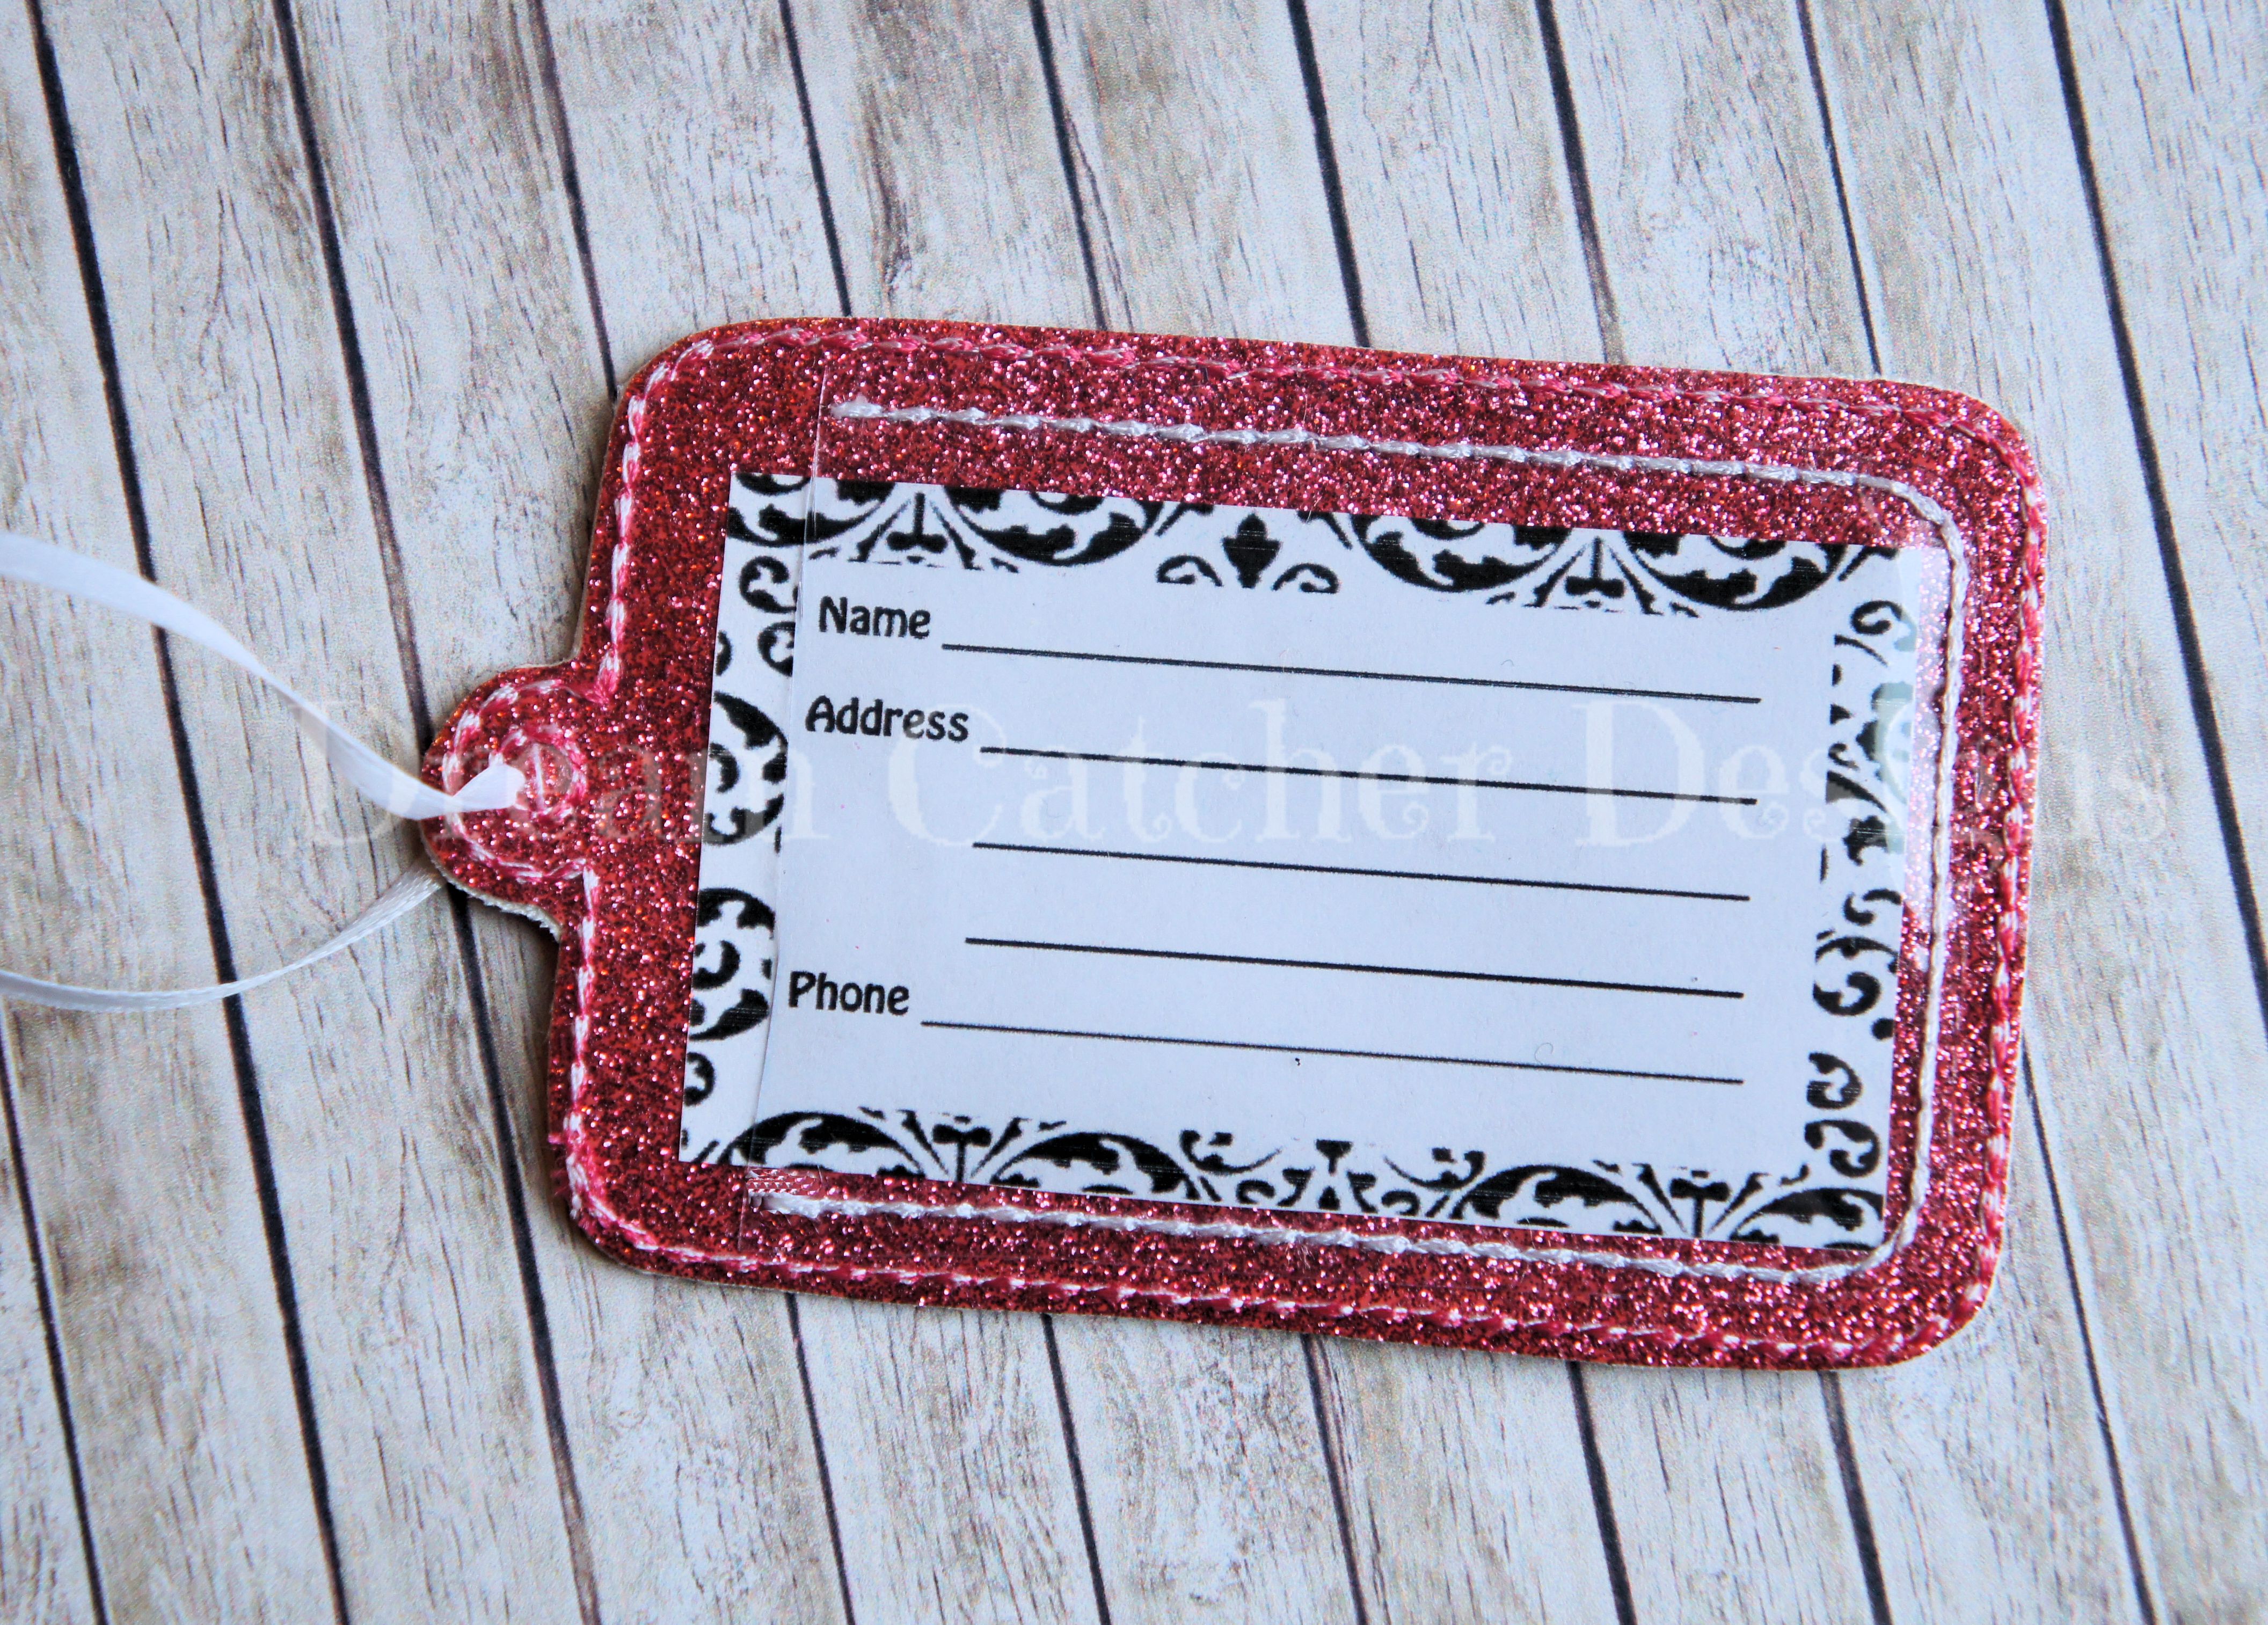 embroidered luggage tag